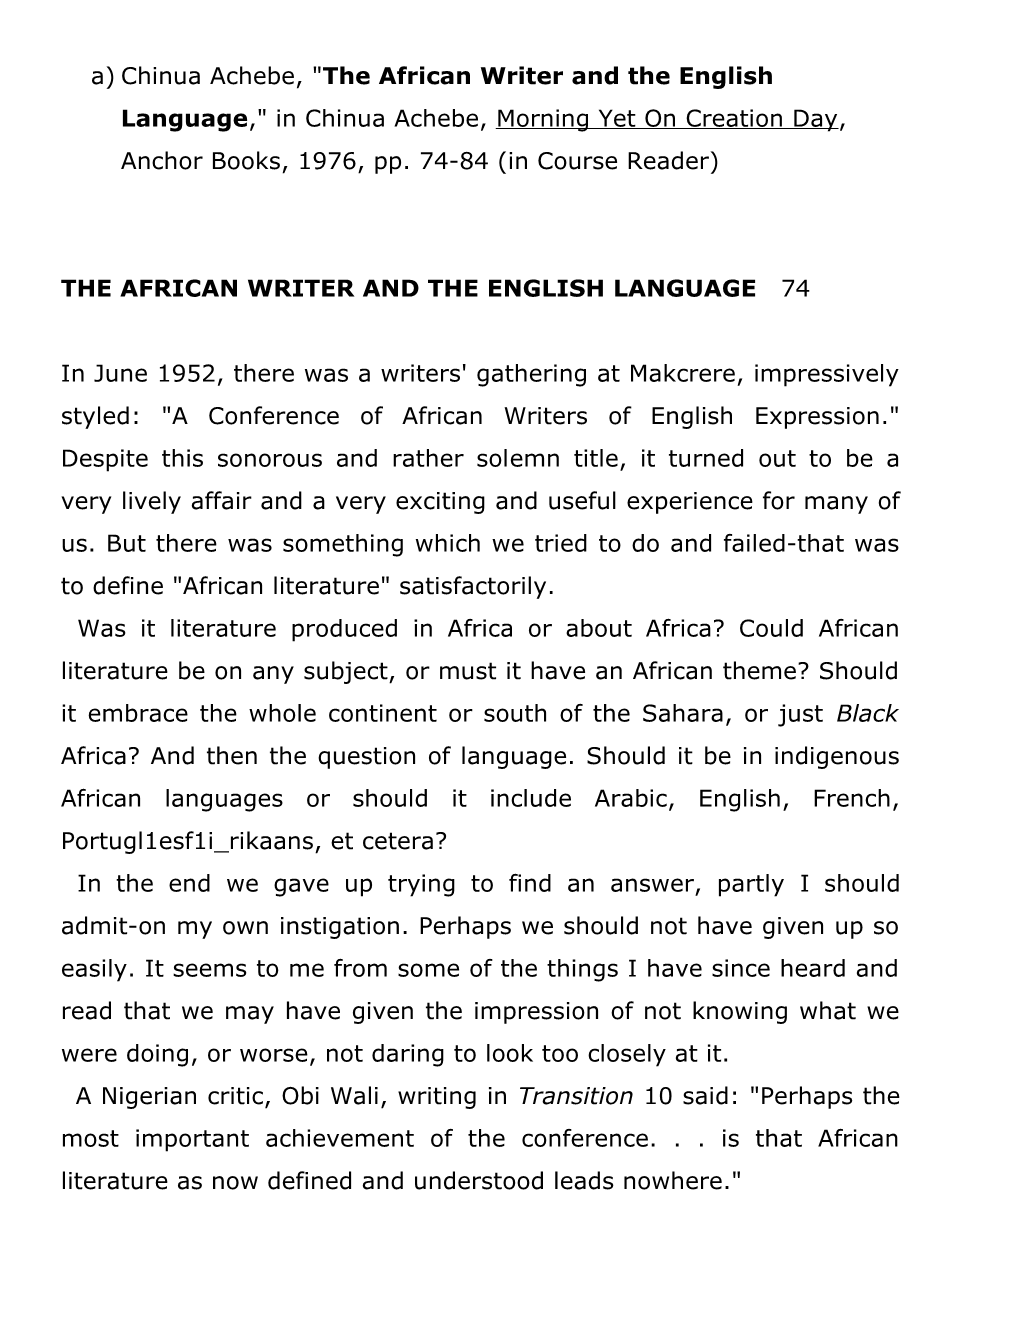 The African Writer and the English Language 74